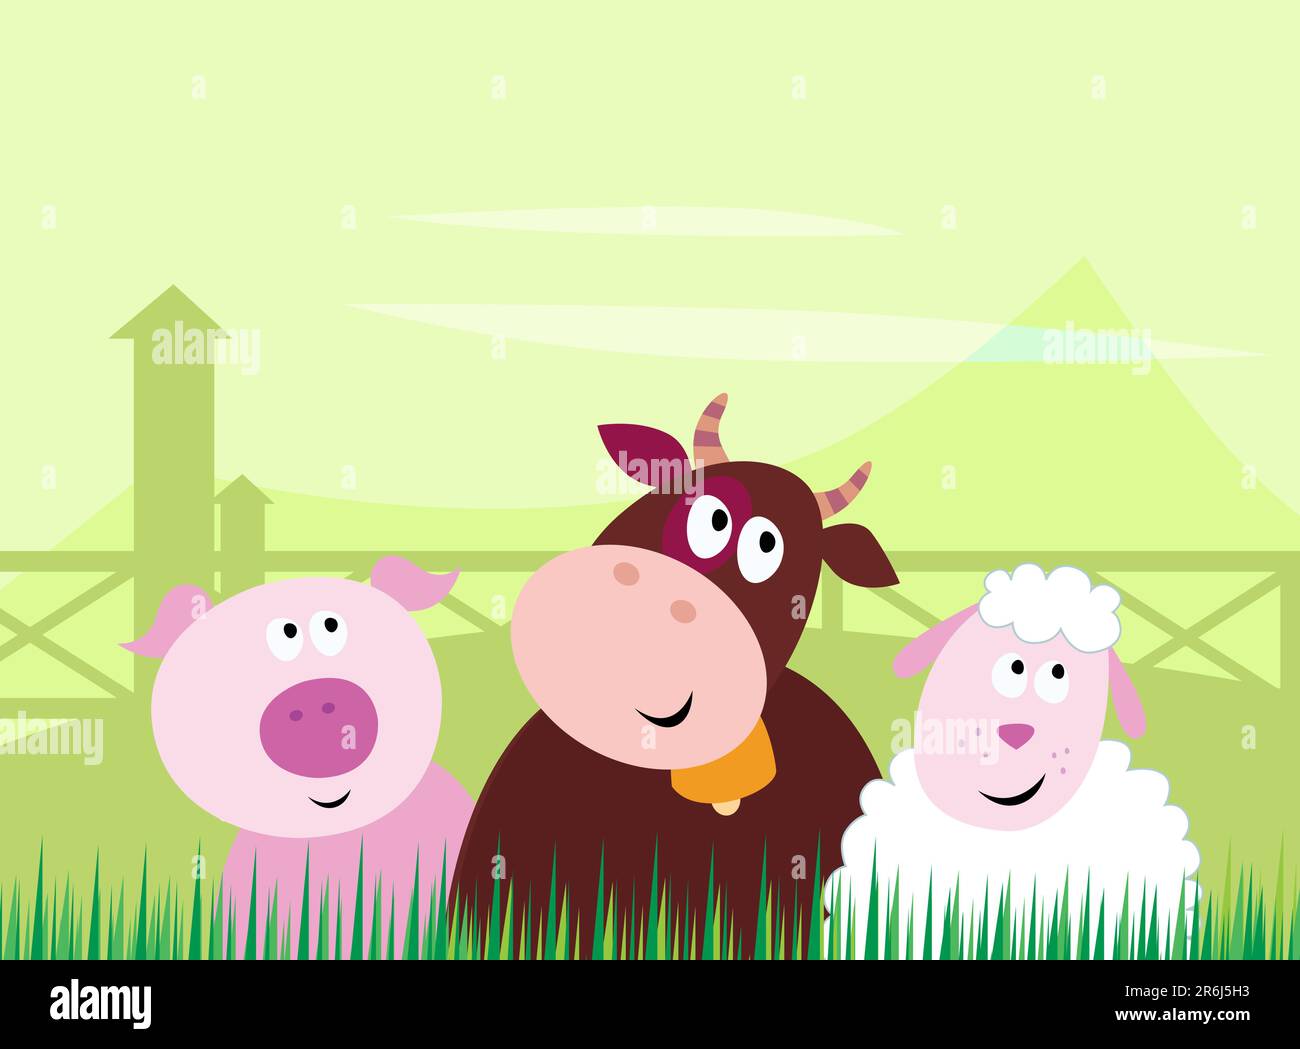 Farm animals - Pig, Cow and Sheep. Vector Illustration. Stock Vector